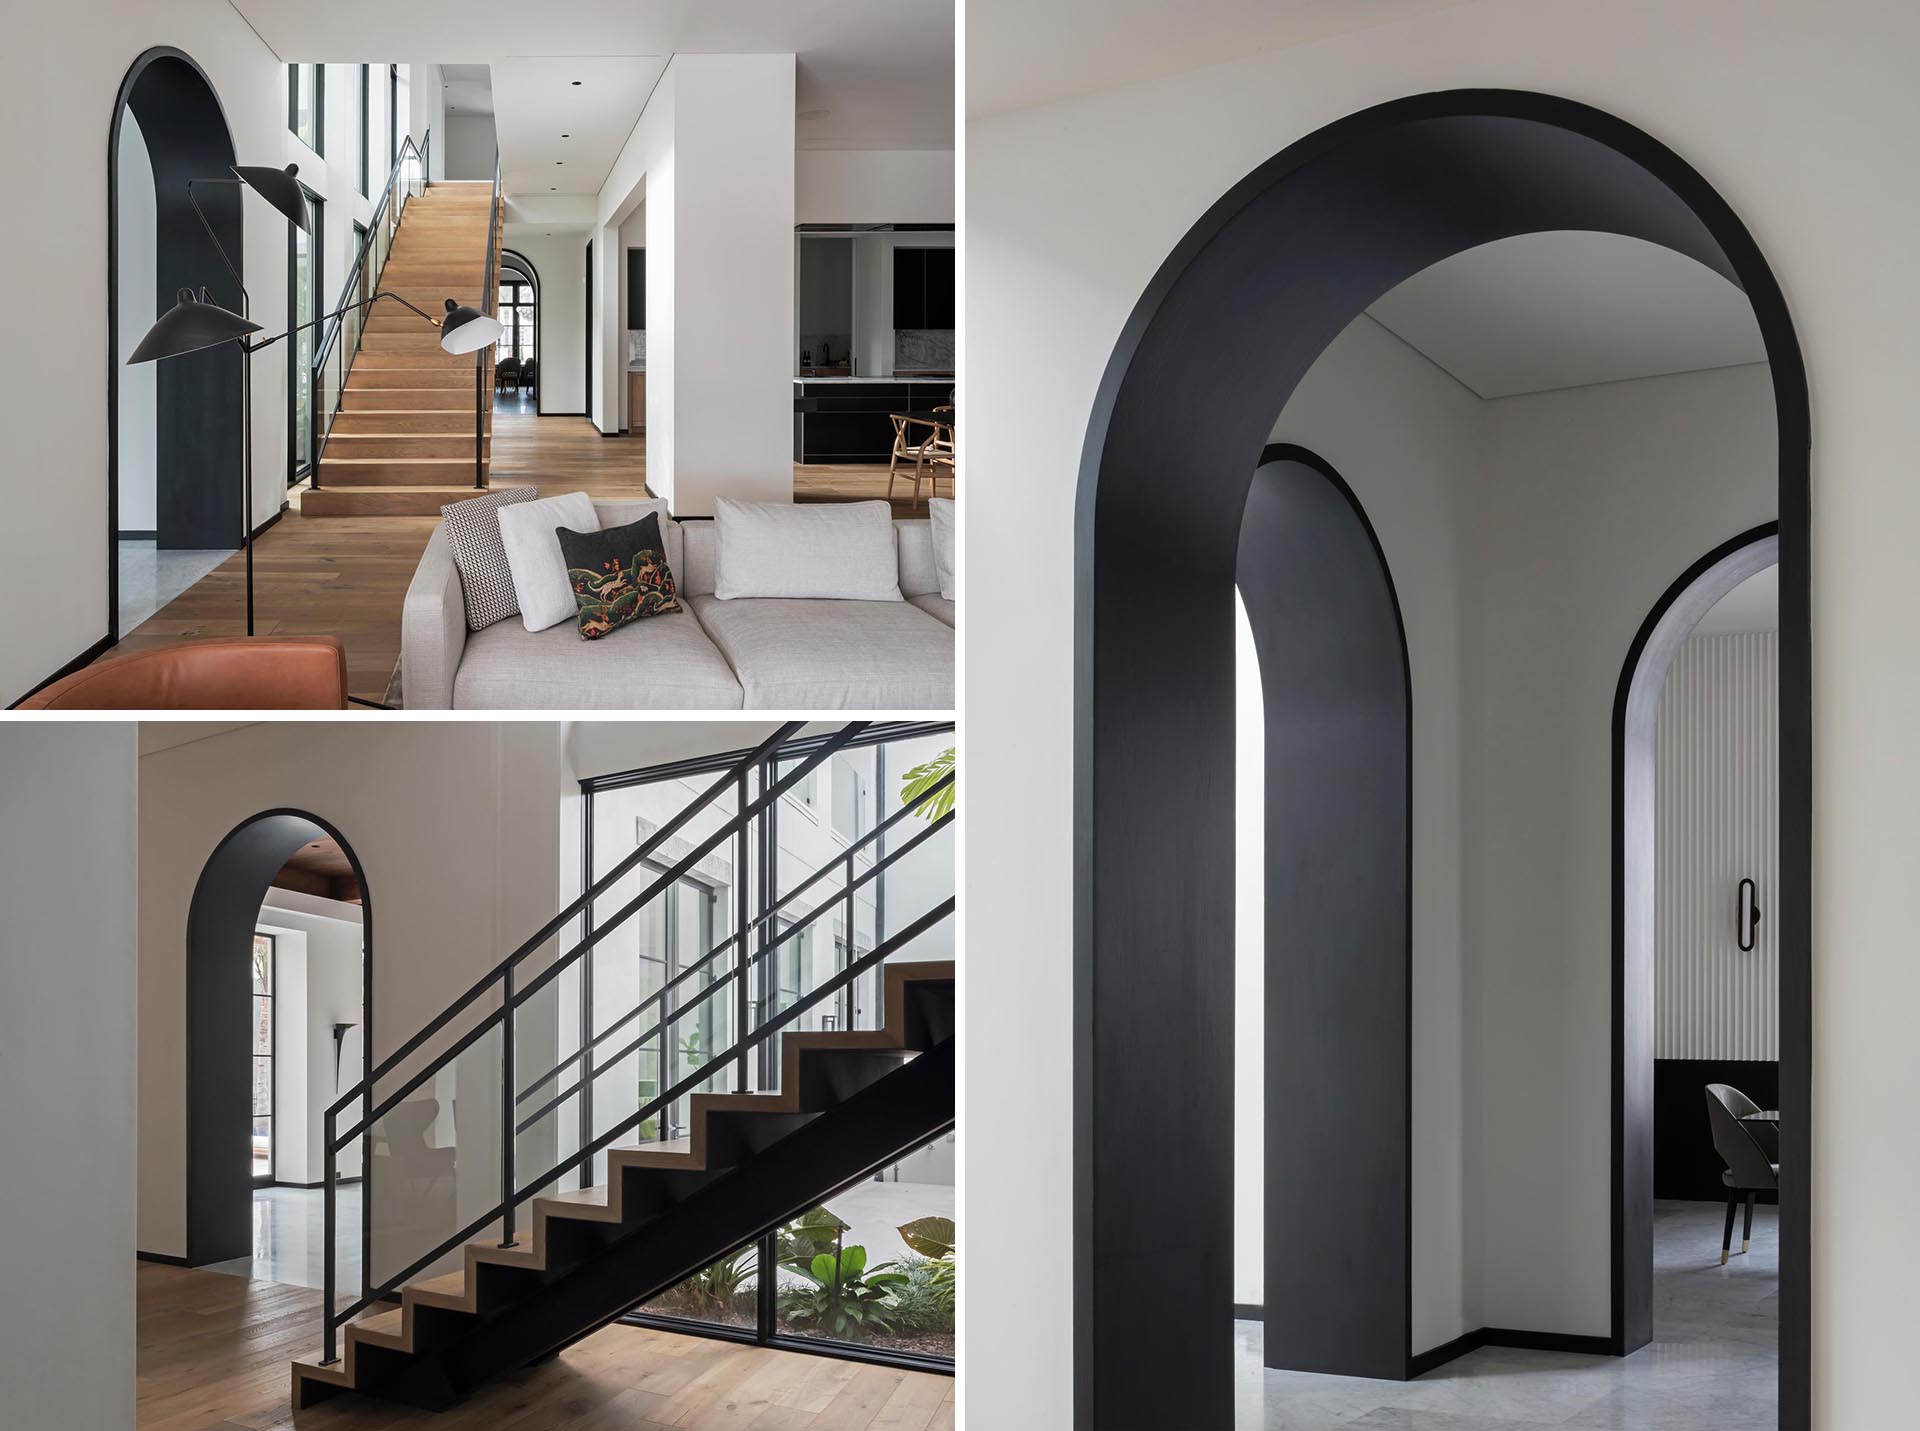 Each of the arched doorways in this modern interior are highlighted by a seamless matte black lining.